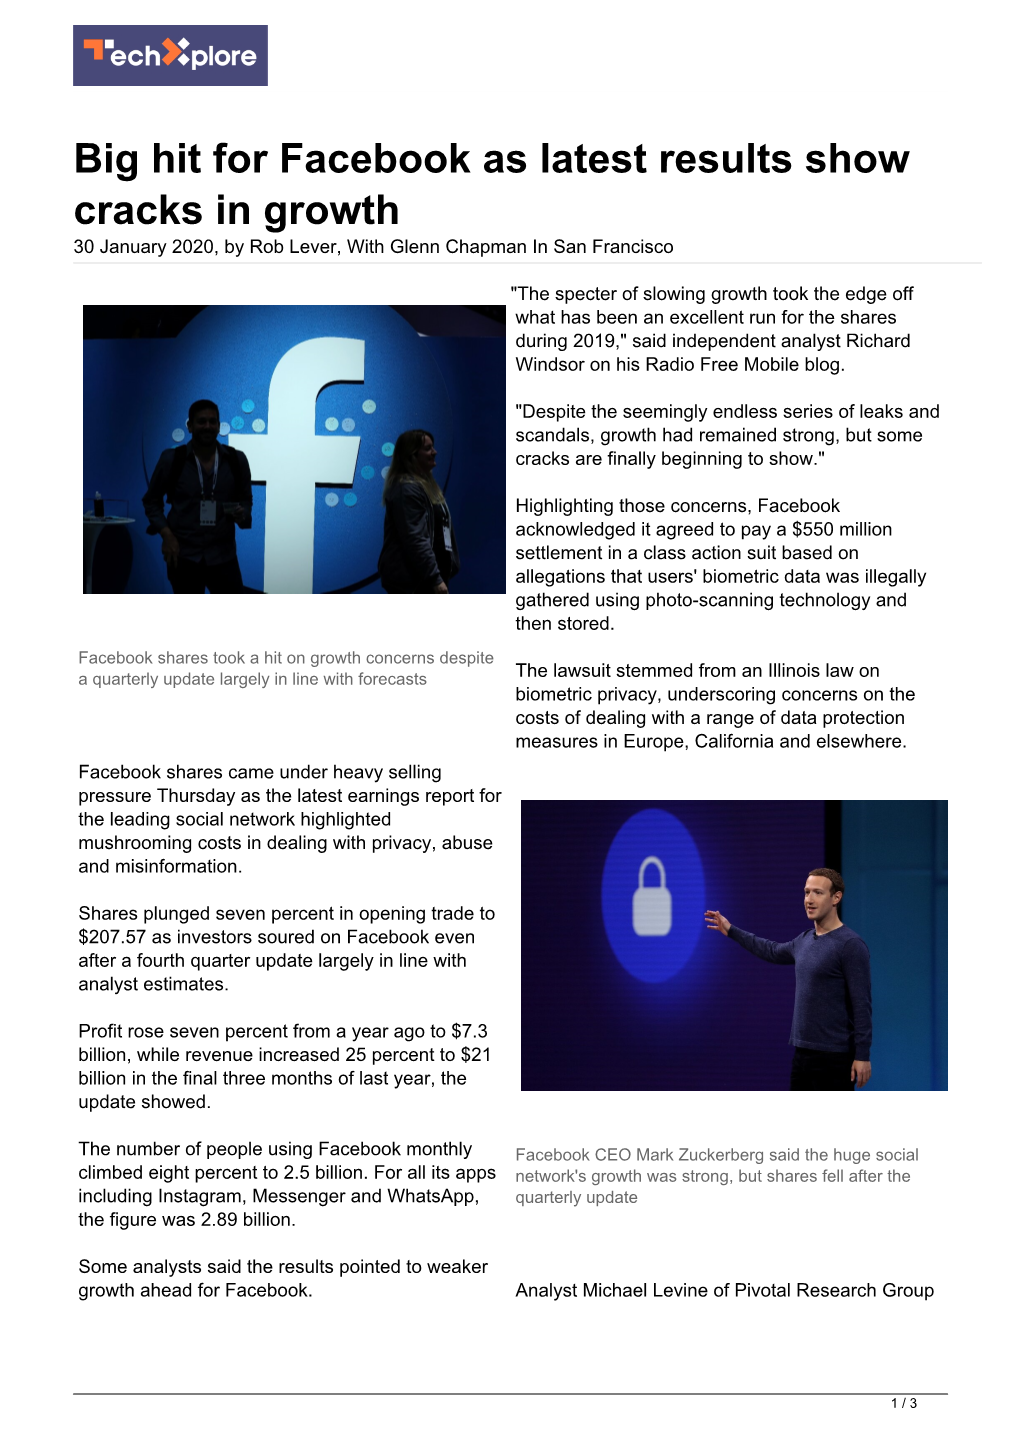 Big Hit for Facebook As Latest Results Show Cracks in Growth 30 January 2020, by Rob Lever, with Glenn Chapman in San Francisco